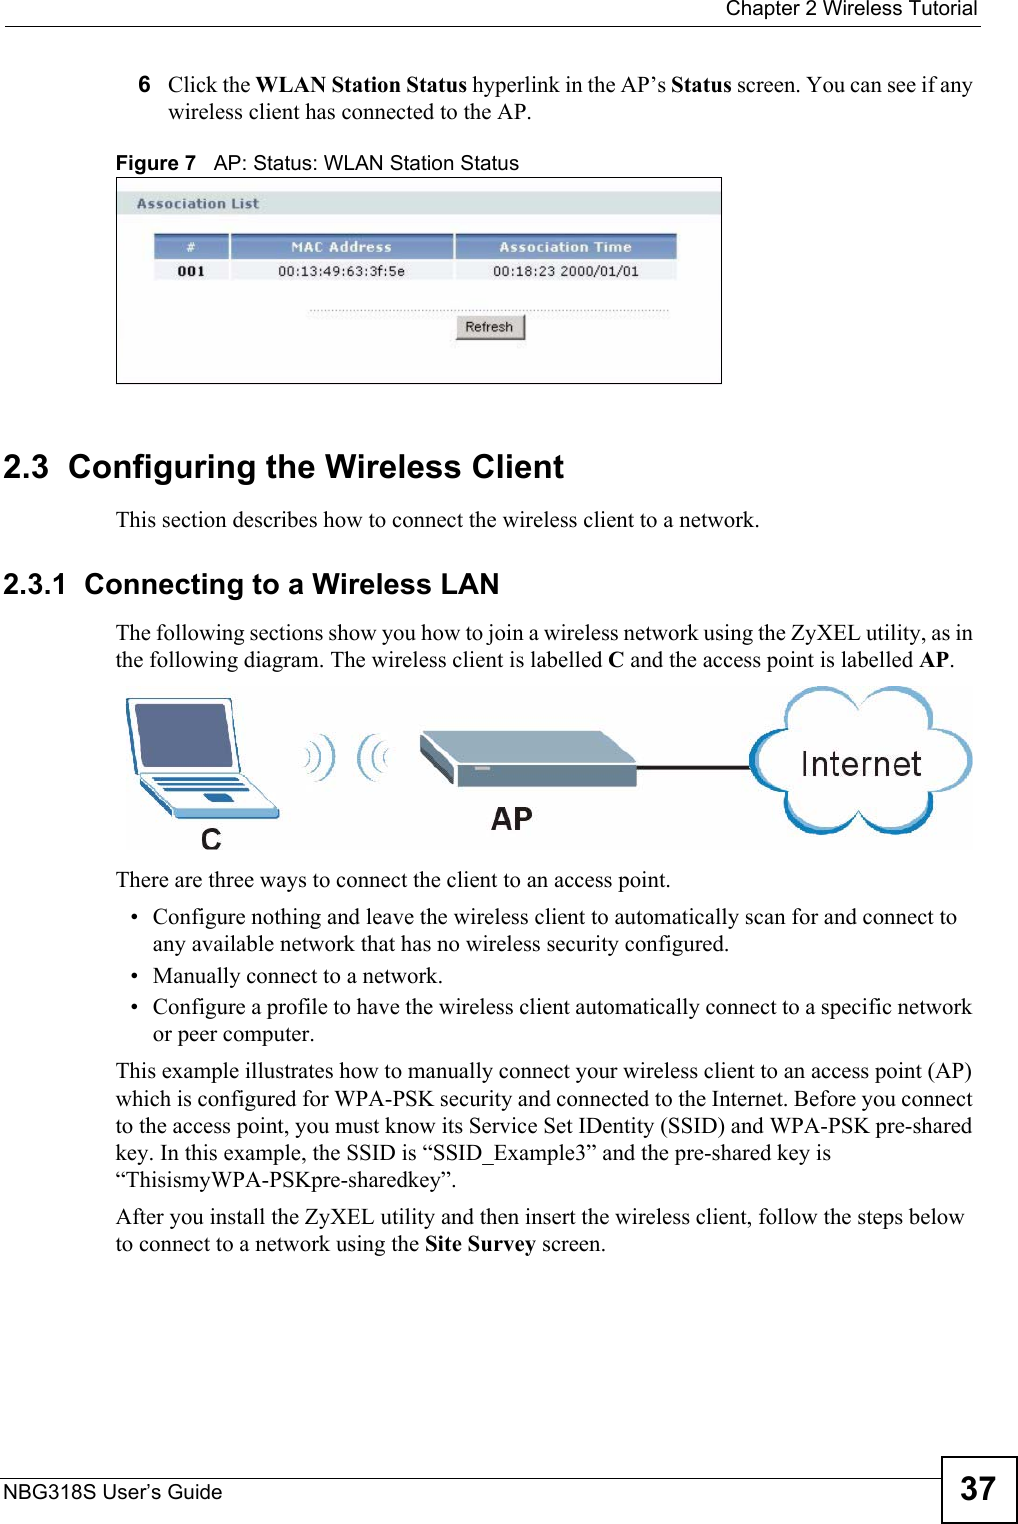  Chapter 2 Wireless TutorialNBG318S User’s Guide 376Click the WLAN Station Status hyperlink in the AP’s Status screen. You can see if any wireless client has connected to the AP.Figure 7   AP: Status: WLAN Station Status2.3  Configuring the Wireless ClientThis section describes how to connect the wireless client to a network.2.3.1  Connecting to a Wireless LANThe following sections show you how to join a wireless network using the ZyXEL utility, as in the following diagram. The wireless client is labelled C and the access point is labelled AP.There are three ways to connect the client to an access point.• Configure nothing and leave the wireless client to automatically scan for and connect to any available network that has no wireless security configured.• Manually connect to a network.• Configure a profile to have the wireless client automatically connect to a specific network or peer computer. This example illustrates how to manually connect your wireless client to an access point (AP) which is configured for WPA-PSK security and connected to the Internet. Before you connect to the access point, you must know its Service Set IDentity (SSID) and WPA-PSK pre-shared key. In this example, the SSID is “SSID_Example3” and the pre-shared key is “ThisismyWPA-PSKpre-sharedkey”. After you install the ZyXEL utility and then insert the wireless client, follow the steps below to connect to a network using the Site Survey screen. 